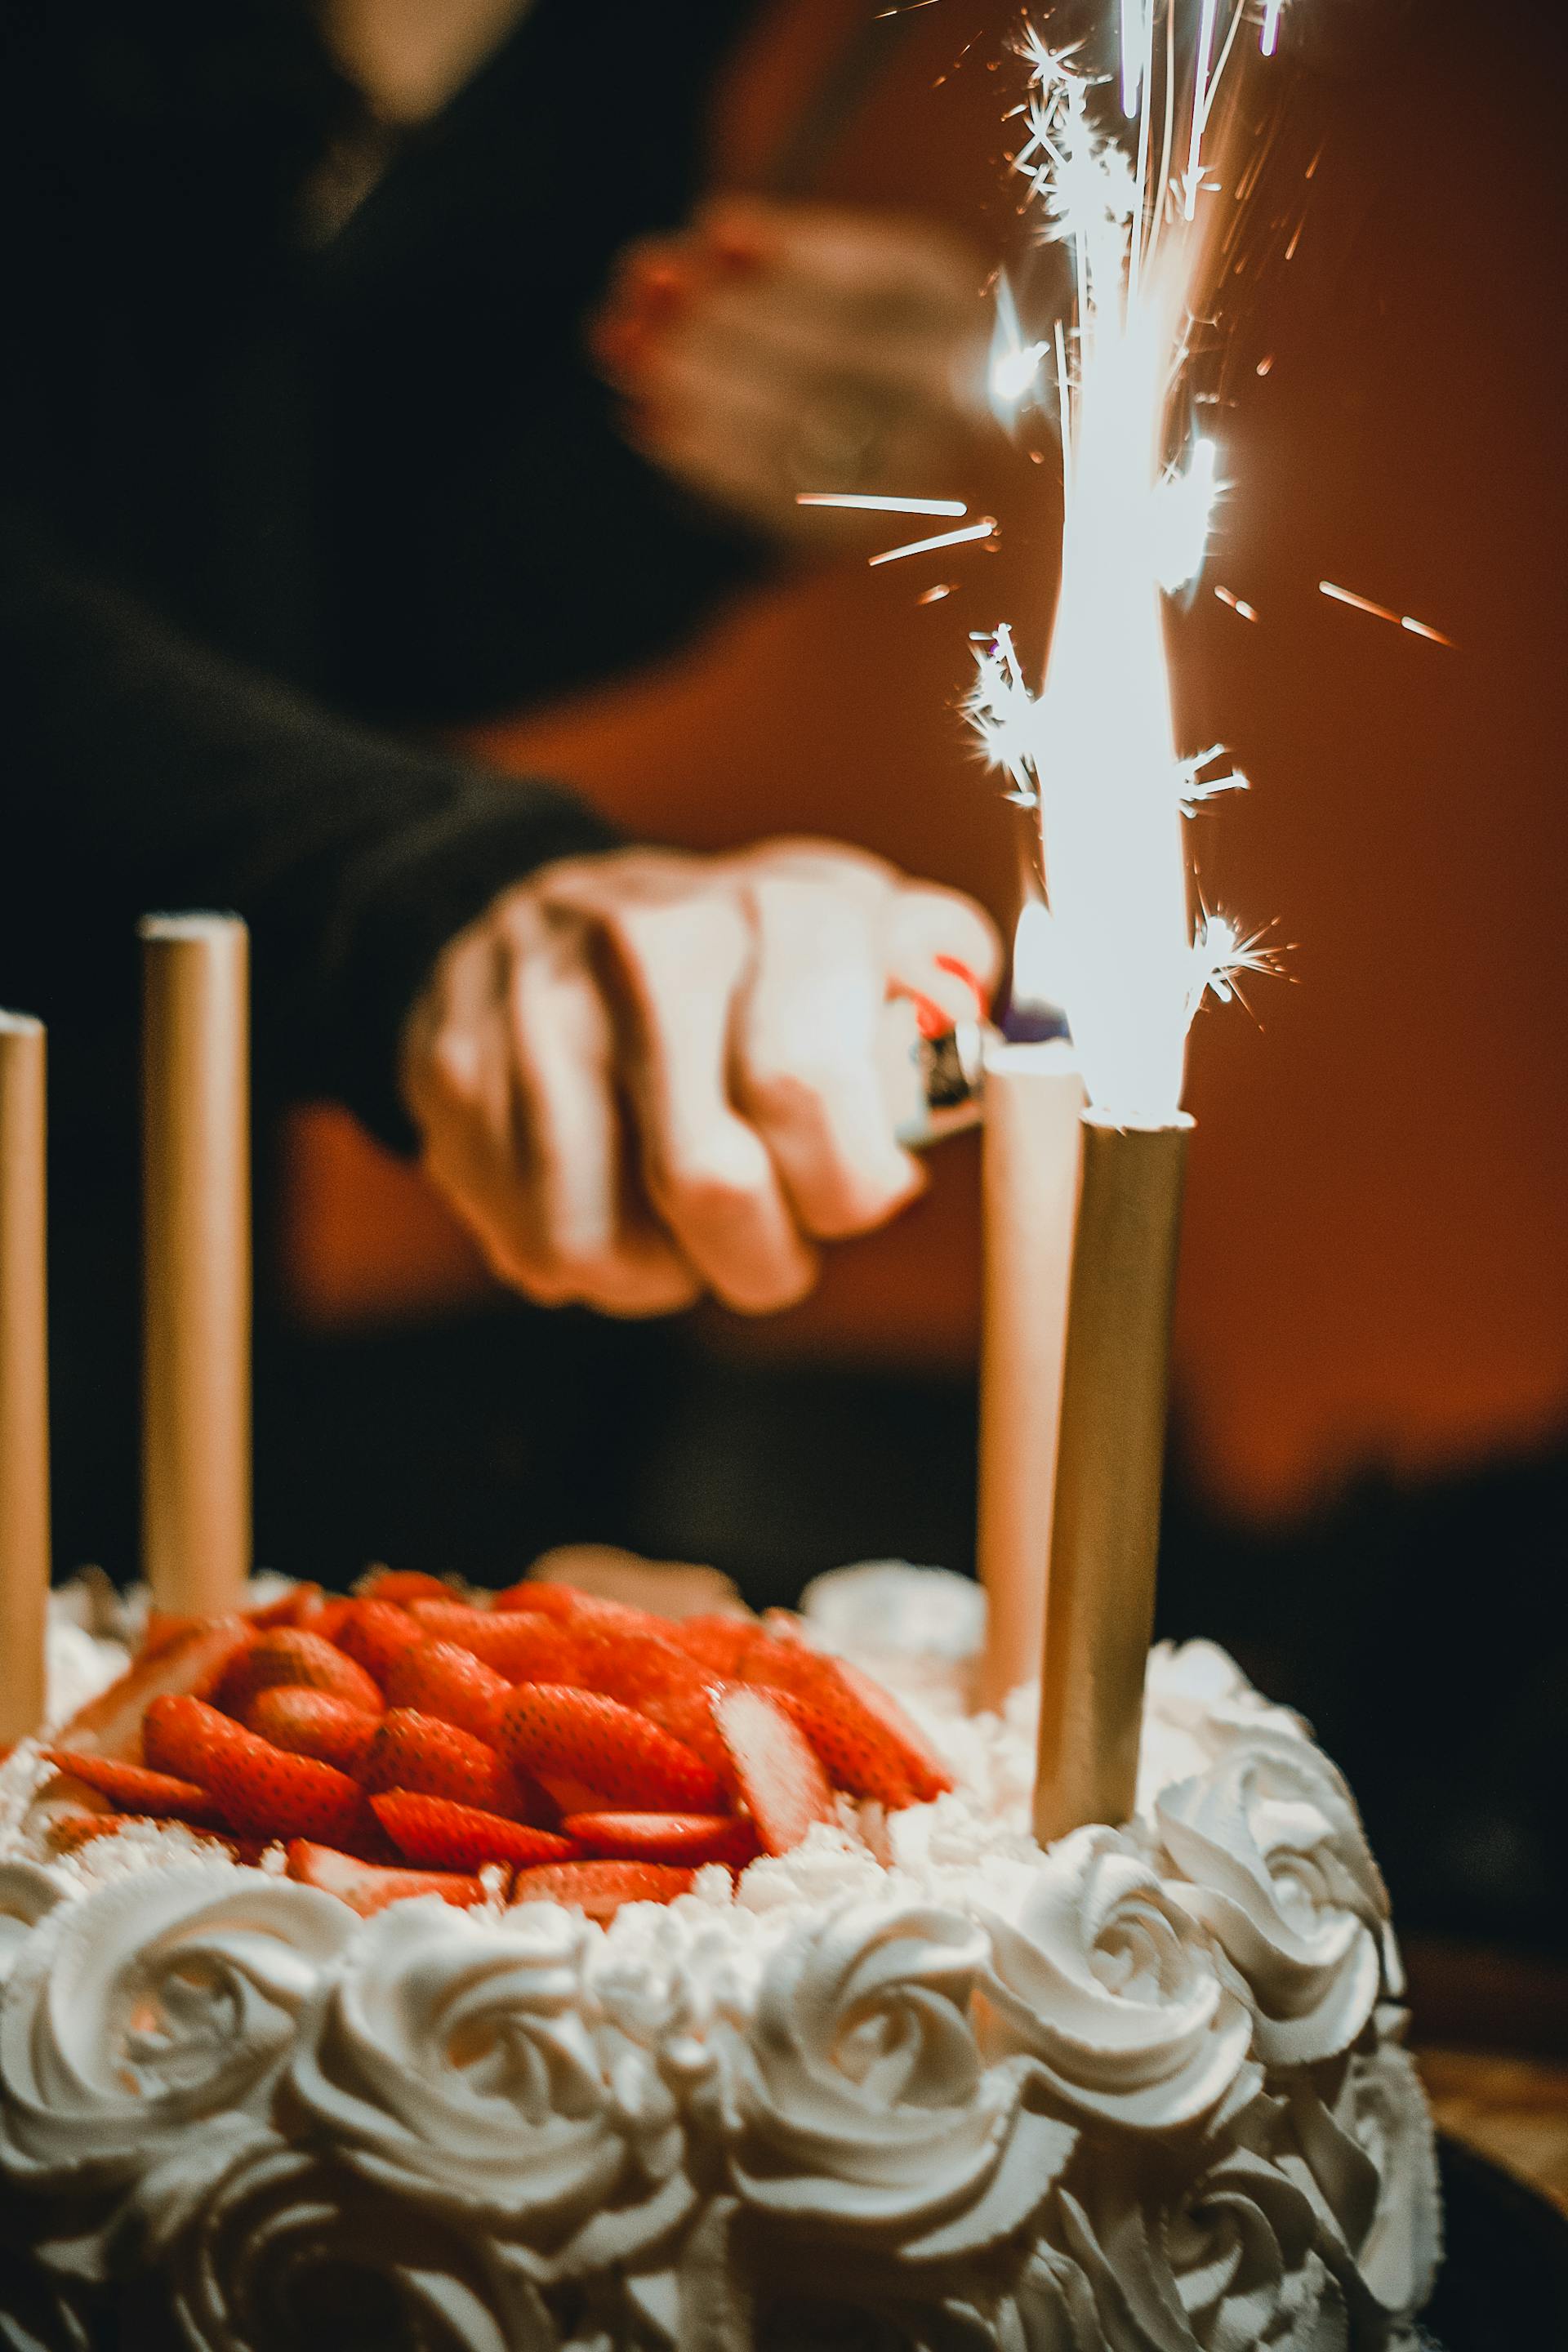 A person lighting sparklers on a cake | Source: Pexels